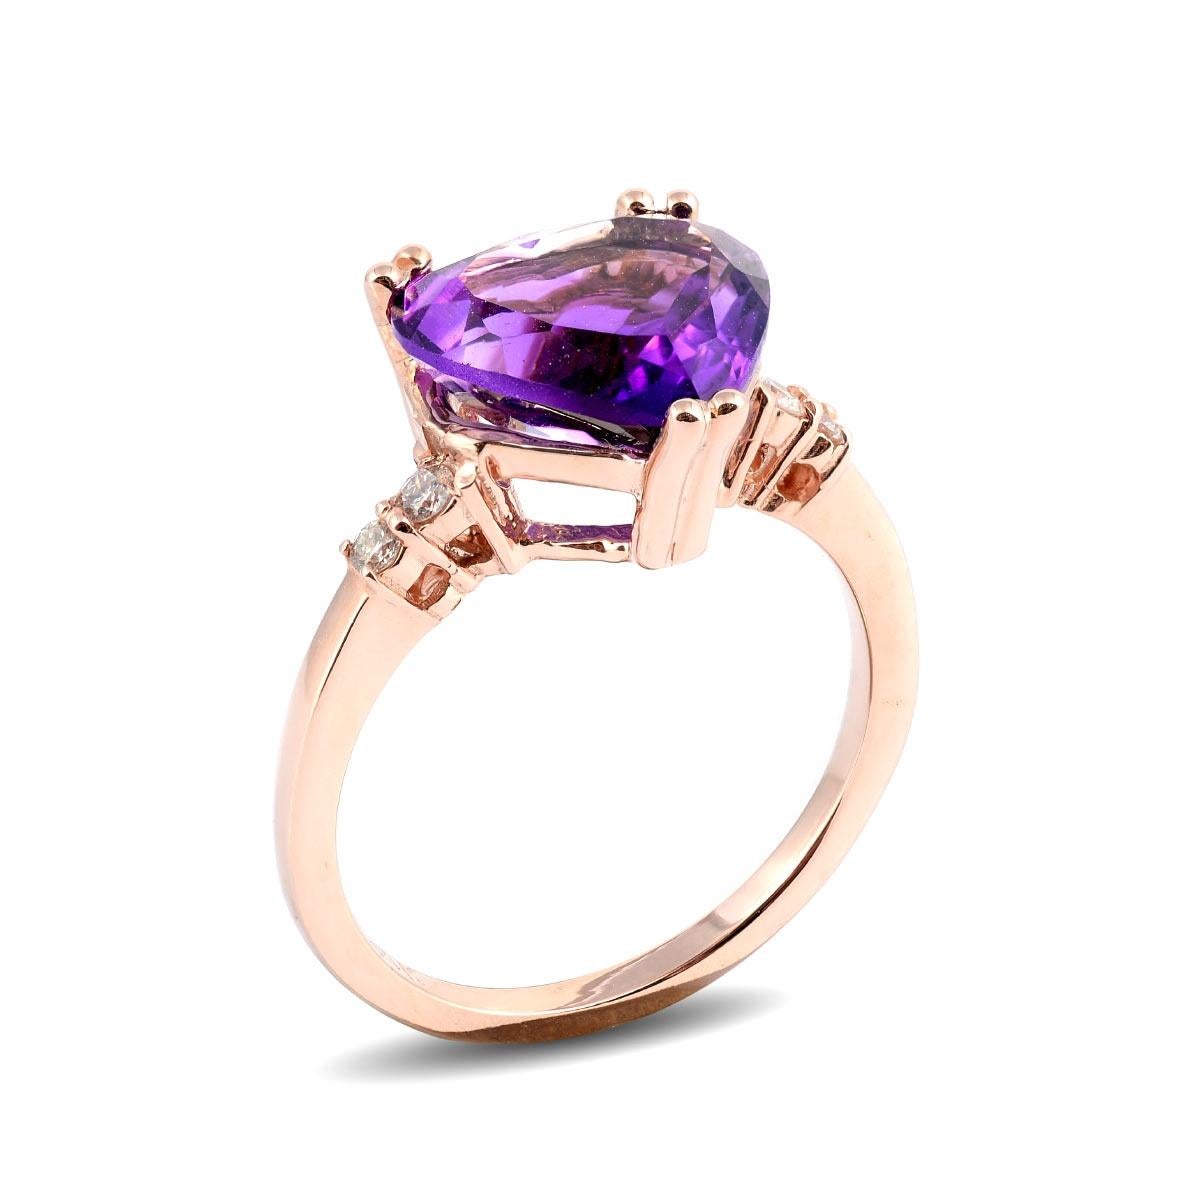 A colorful choice, here is a natural Amethyst that comes set in a 14K rose gold ring. Set with shimmering diamonds on either side, the vivid hues of the purple are brought to life with the fire in the diamonds. A beautiful pair, this ring is a